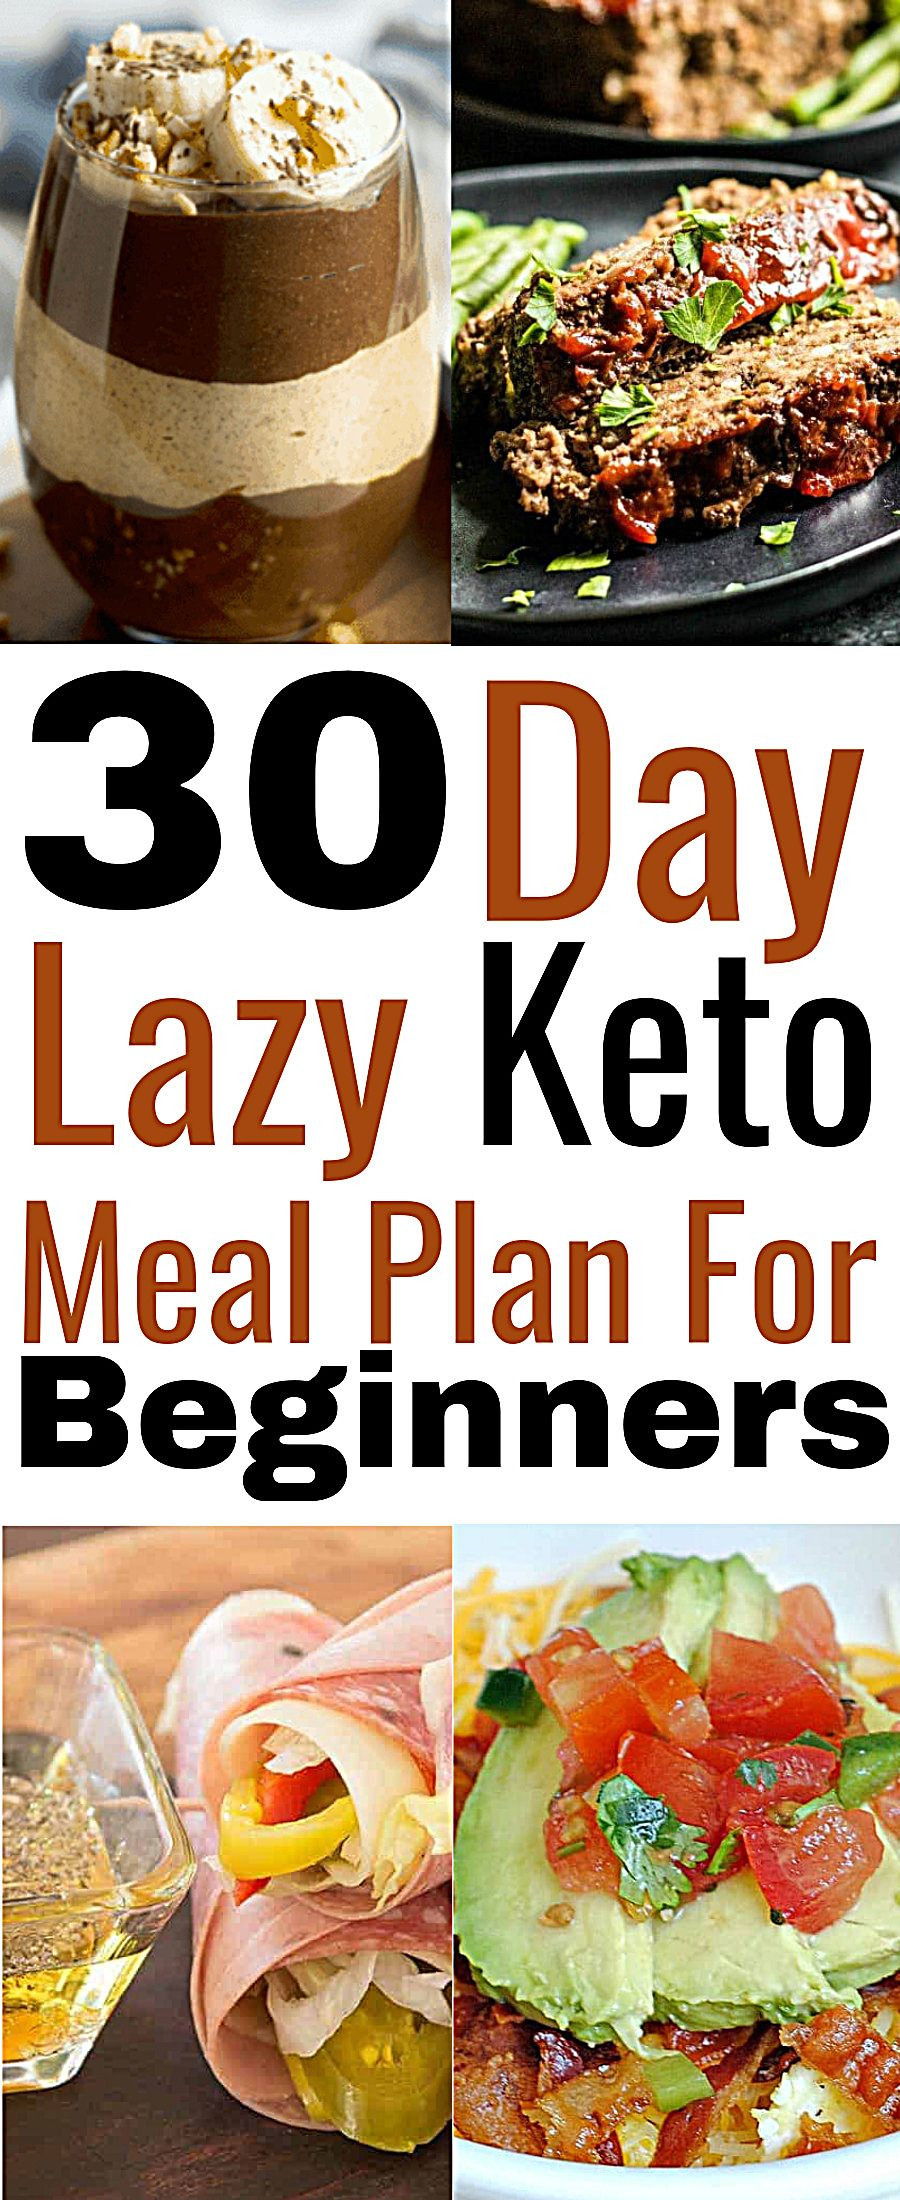 Lazy Keto Diet For Beginners
 Lazy Keto Meal Plan 30 Day Keto Meal Plan With Recipes